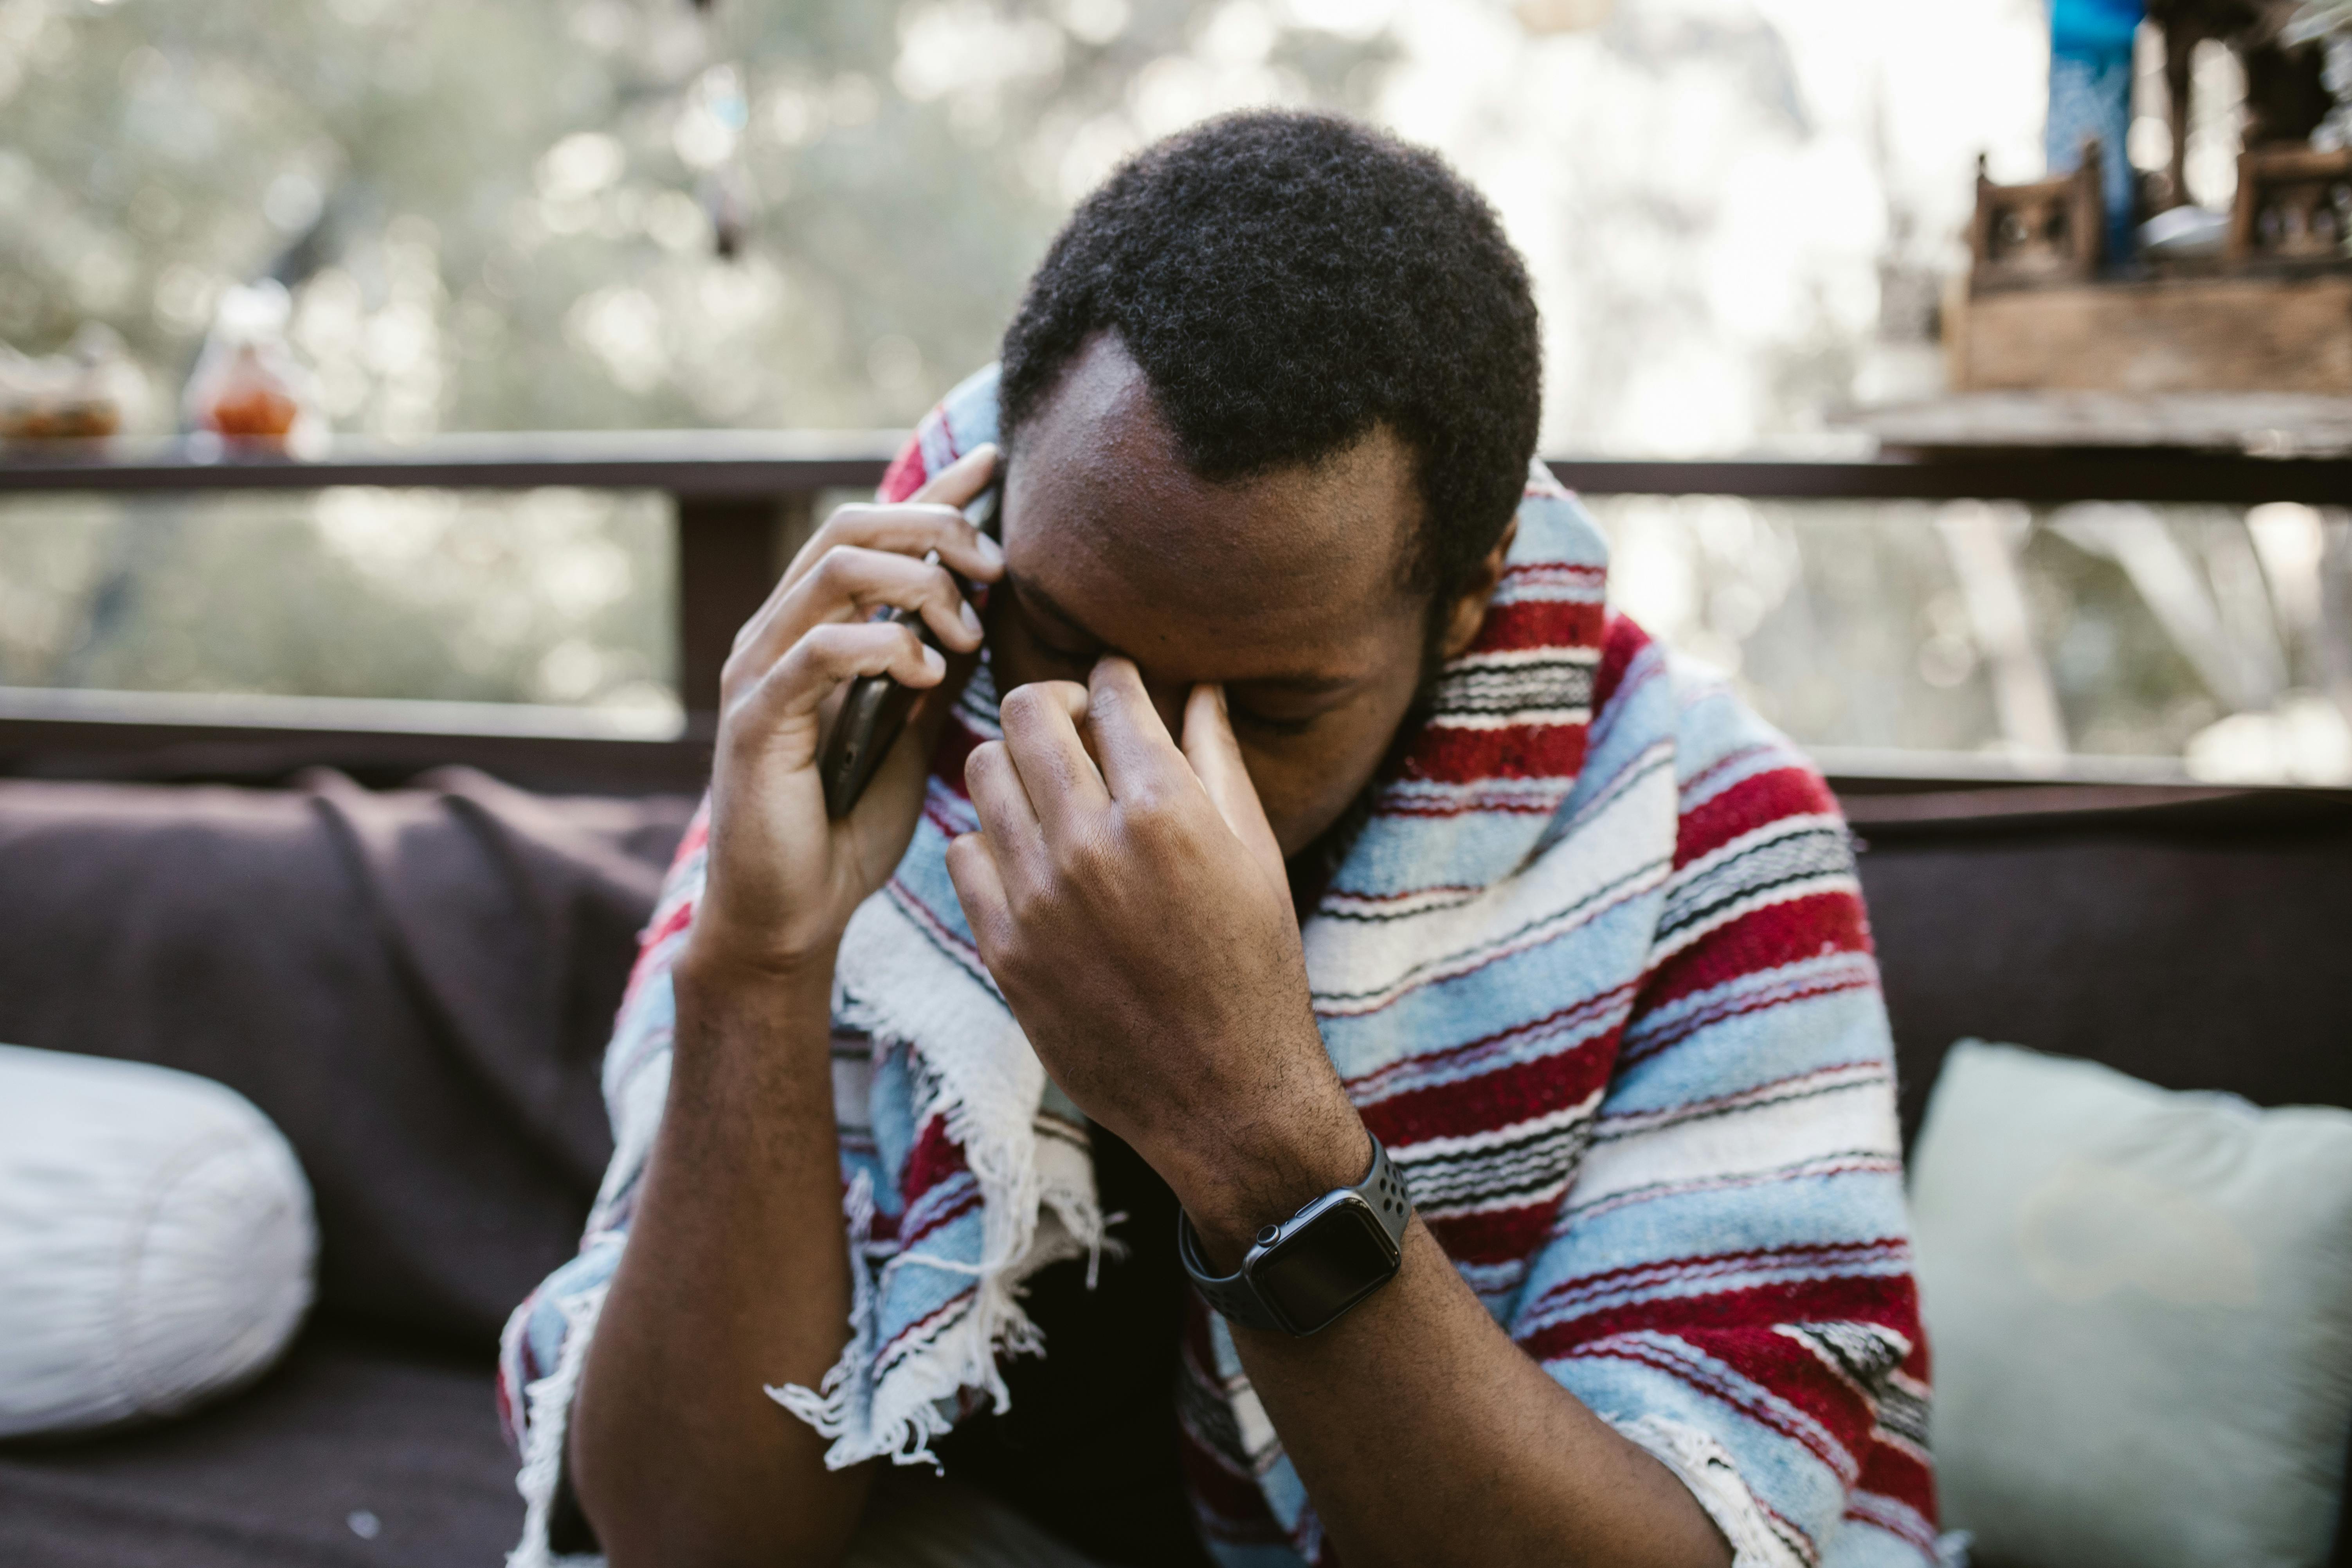 A frustrated man with his hand on his upper temple while talking on the phone | Source: Pexels